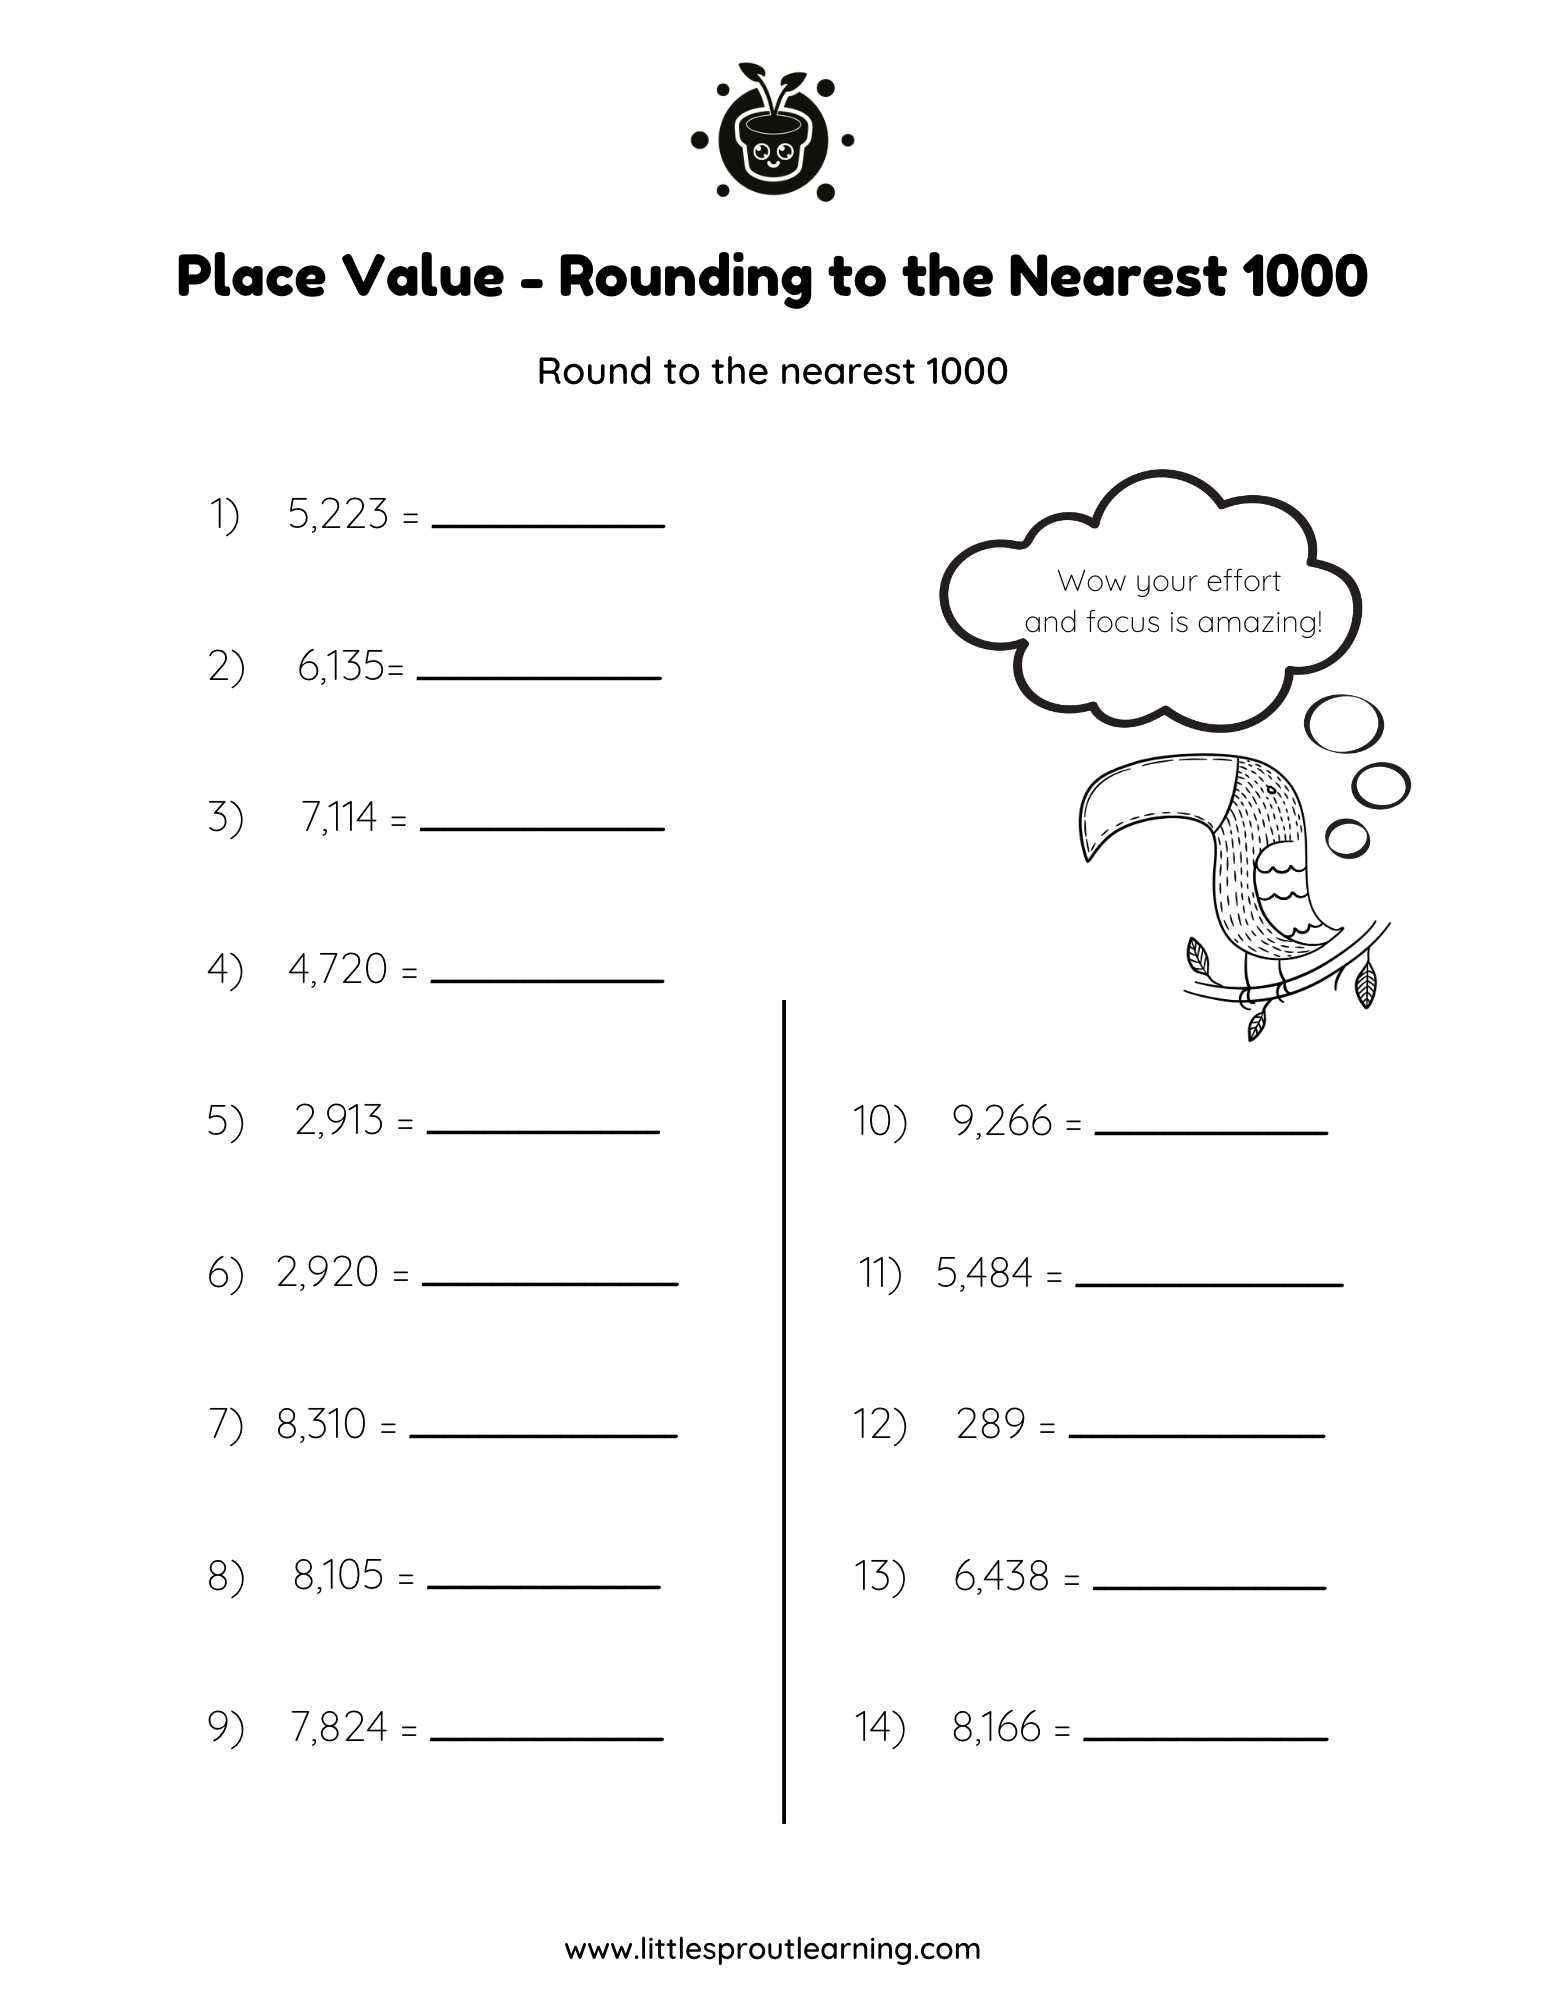 Place Values Worksheet – Rounding to the Nearest 1000